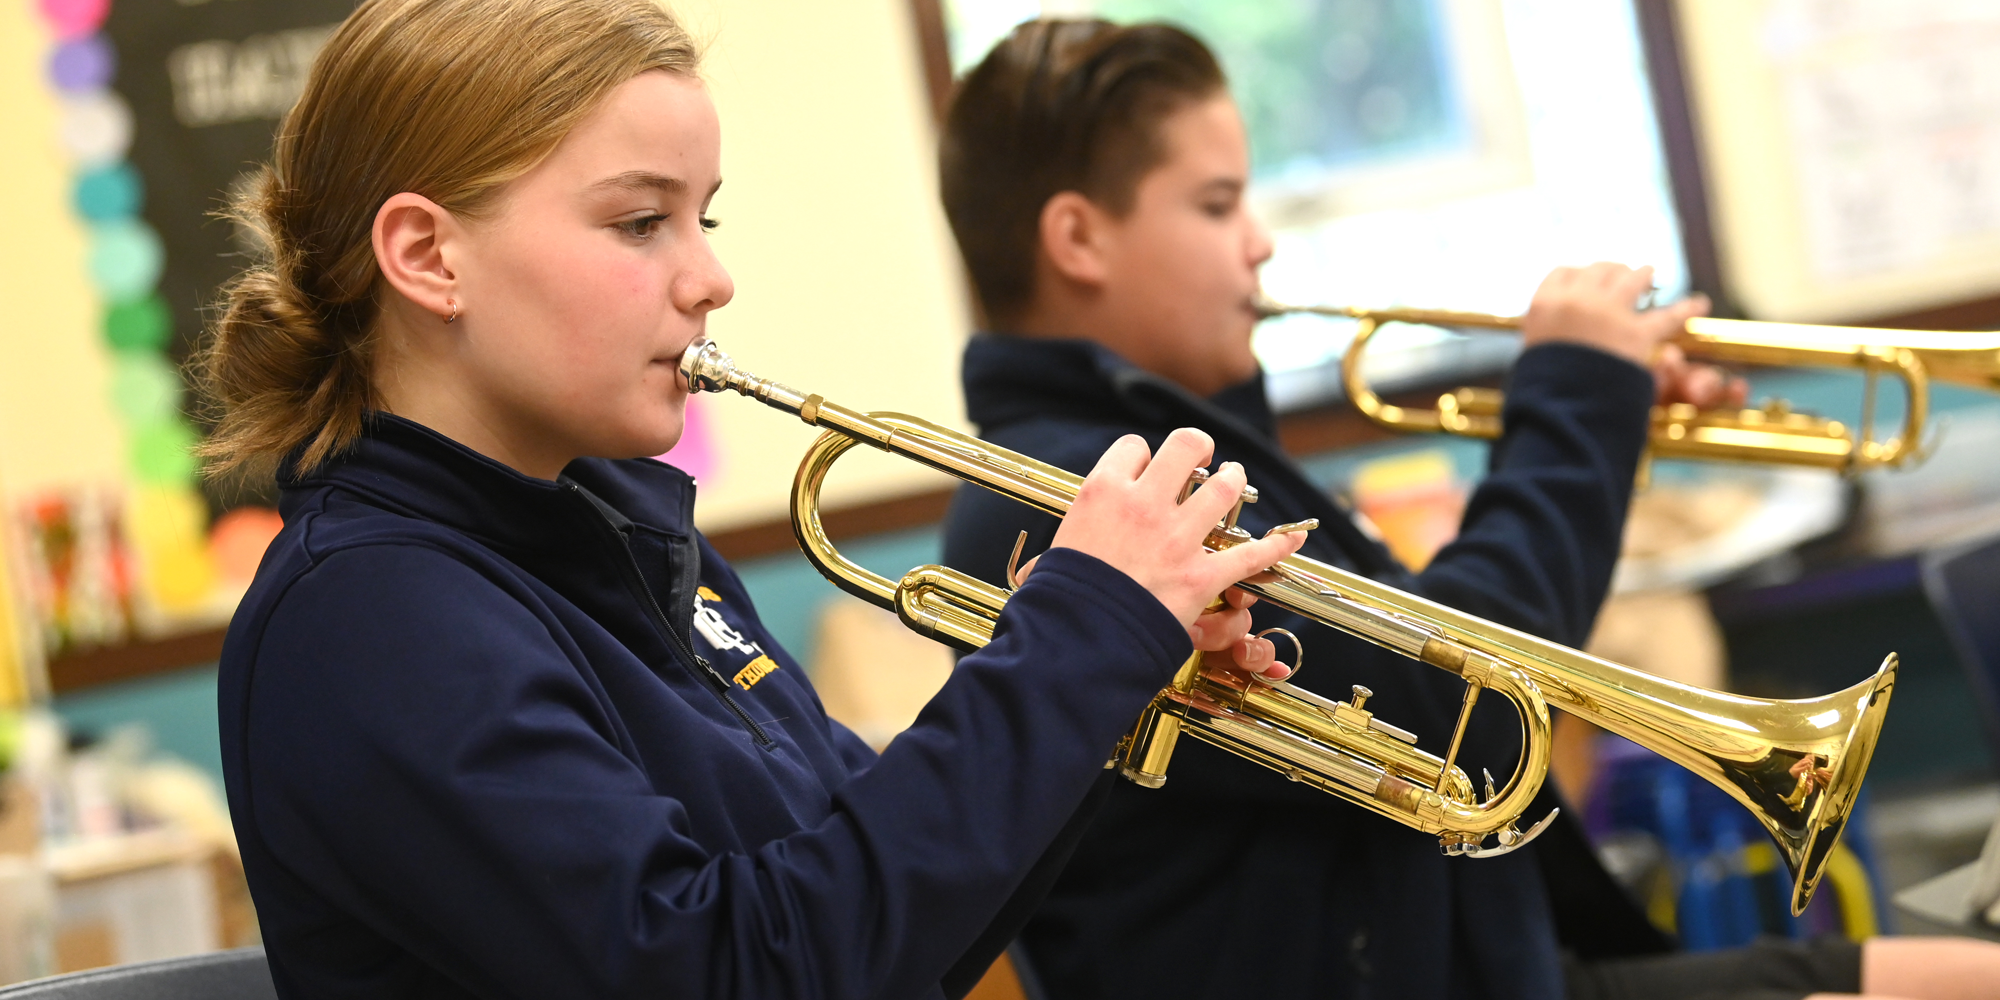 Band students practice horn at Holy Cross School which is located near the Red Smith neighborhood.